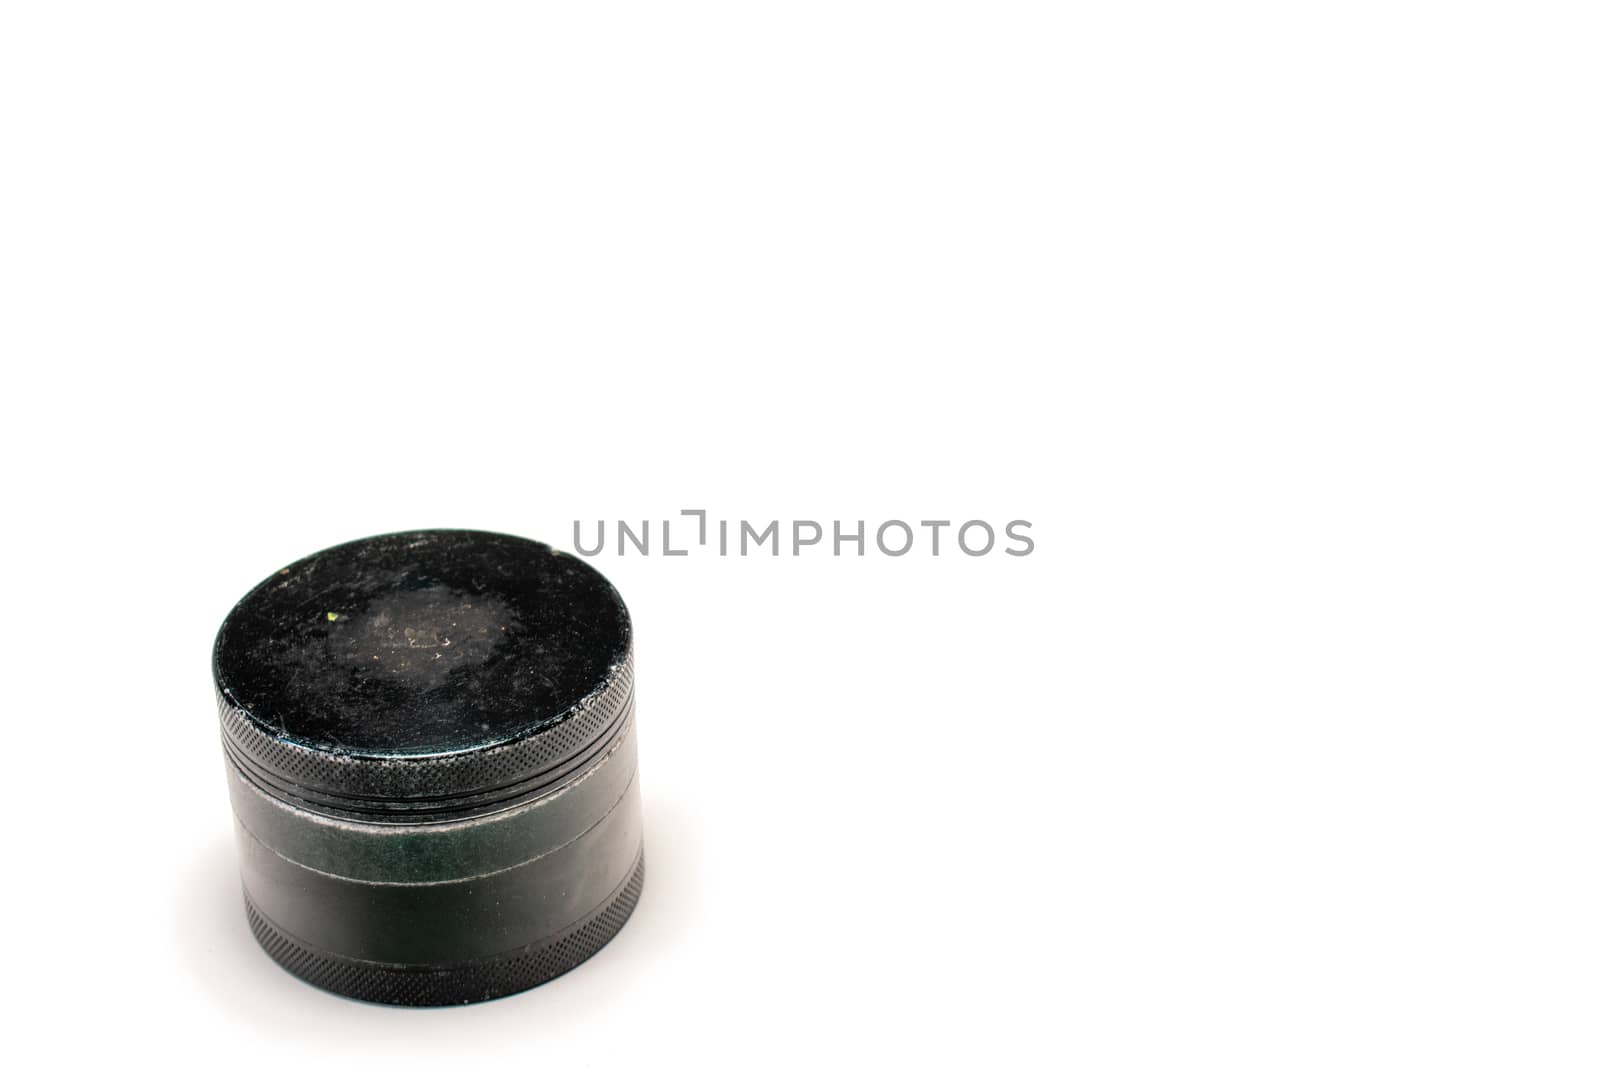 A Used Black Cannabis Grinder With the Lid Closed 